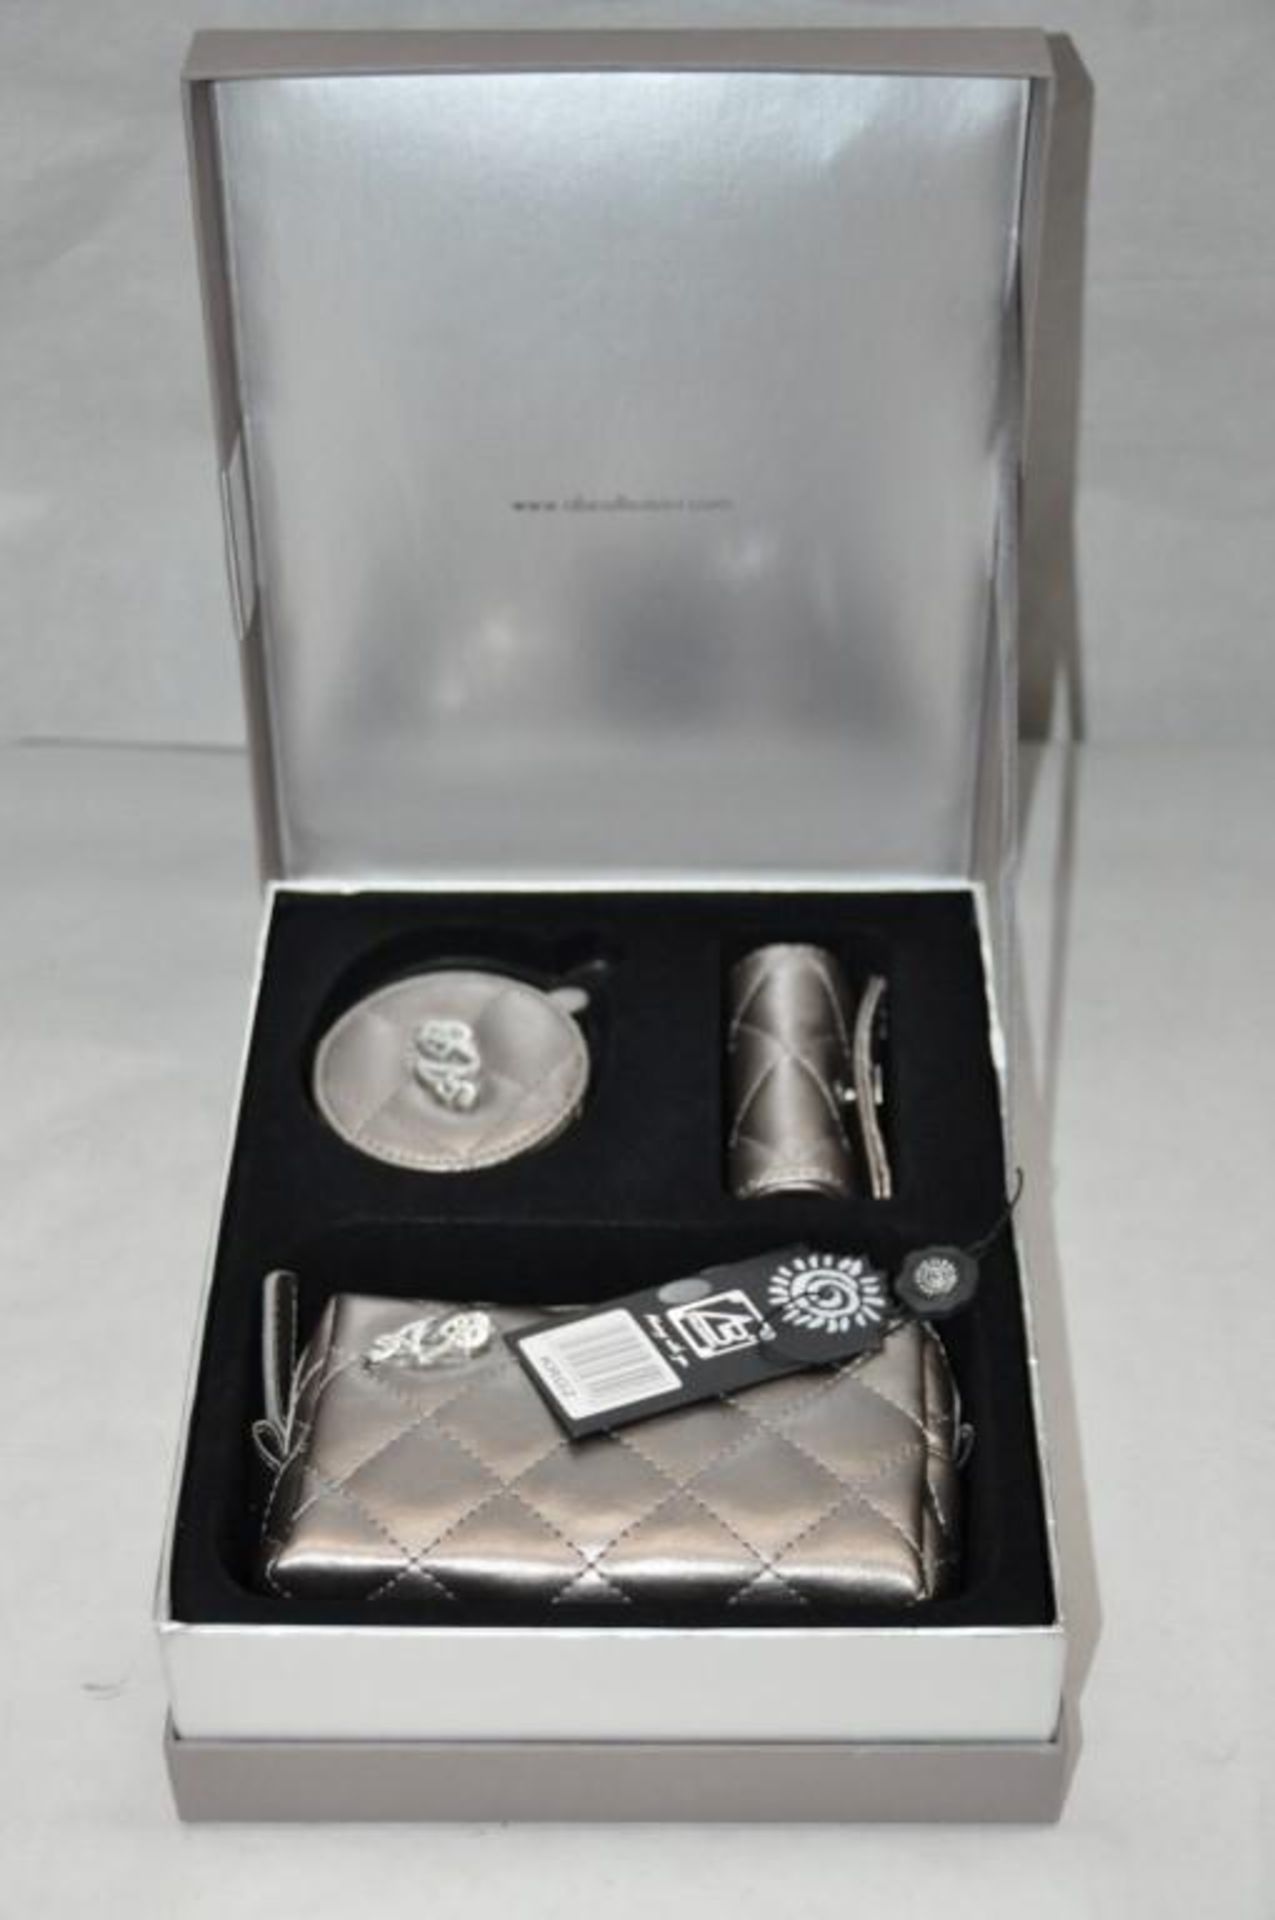 1 x "AB Collezioni" Italian Luxury 3pc Matching Gift Set - Includes Make Up Bag, Round Mirror, and - Image 3 of 6